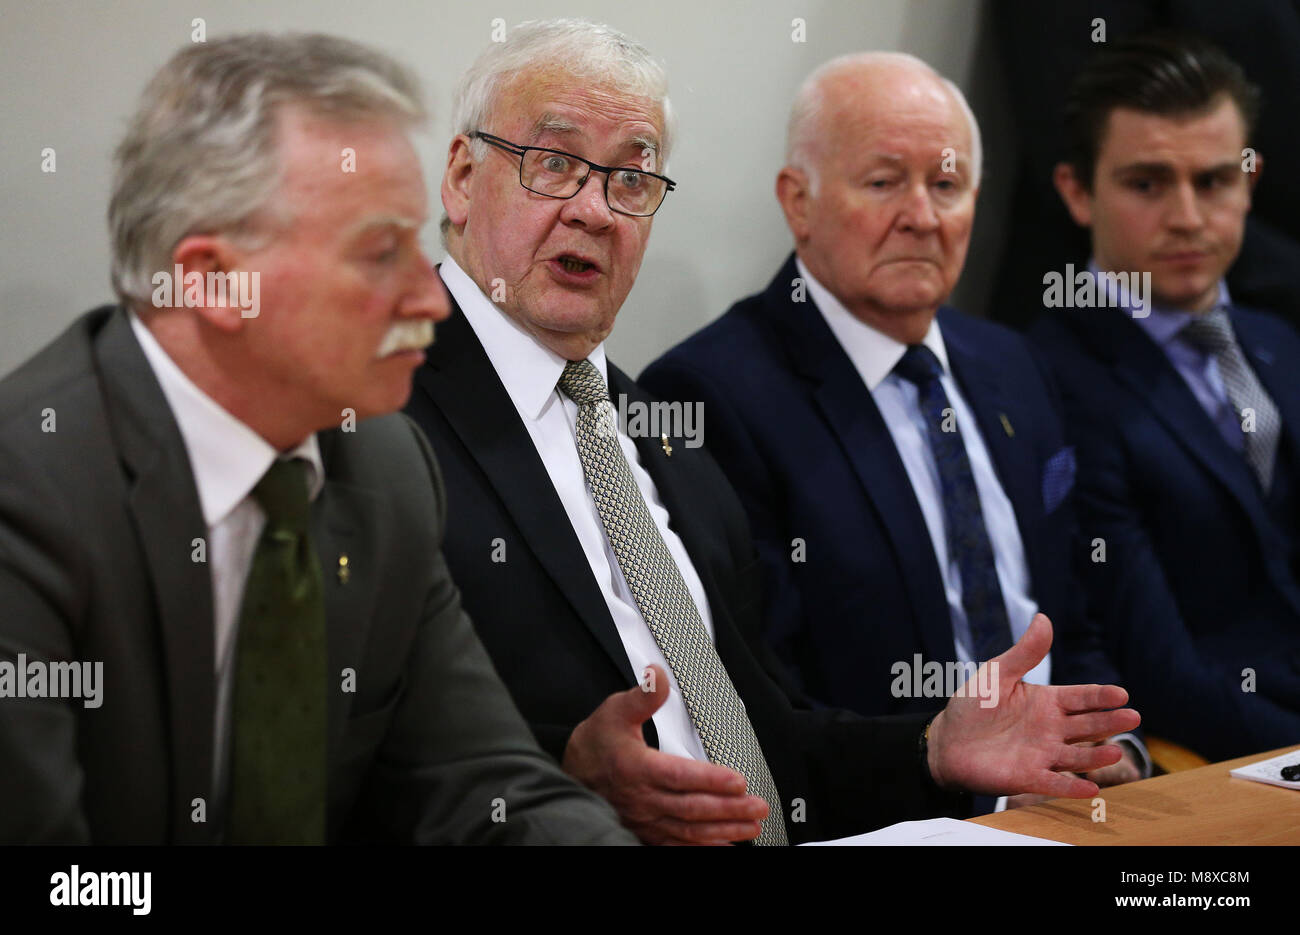 Francie McGuigan (second left), one of the 14 'Hooded' men, who were kept in hoods interned in Northern Ireland in 1971, during a press conference at KRW Law in Belfast, after the European Court of Human Rights delivered its judgement on the treatment of the 'Hooded' men. Stock Photo